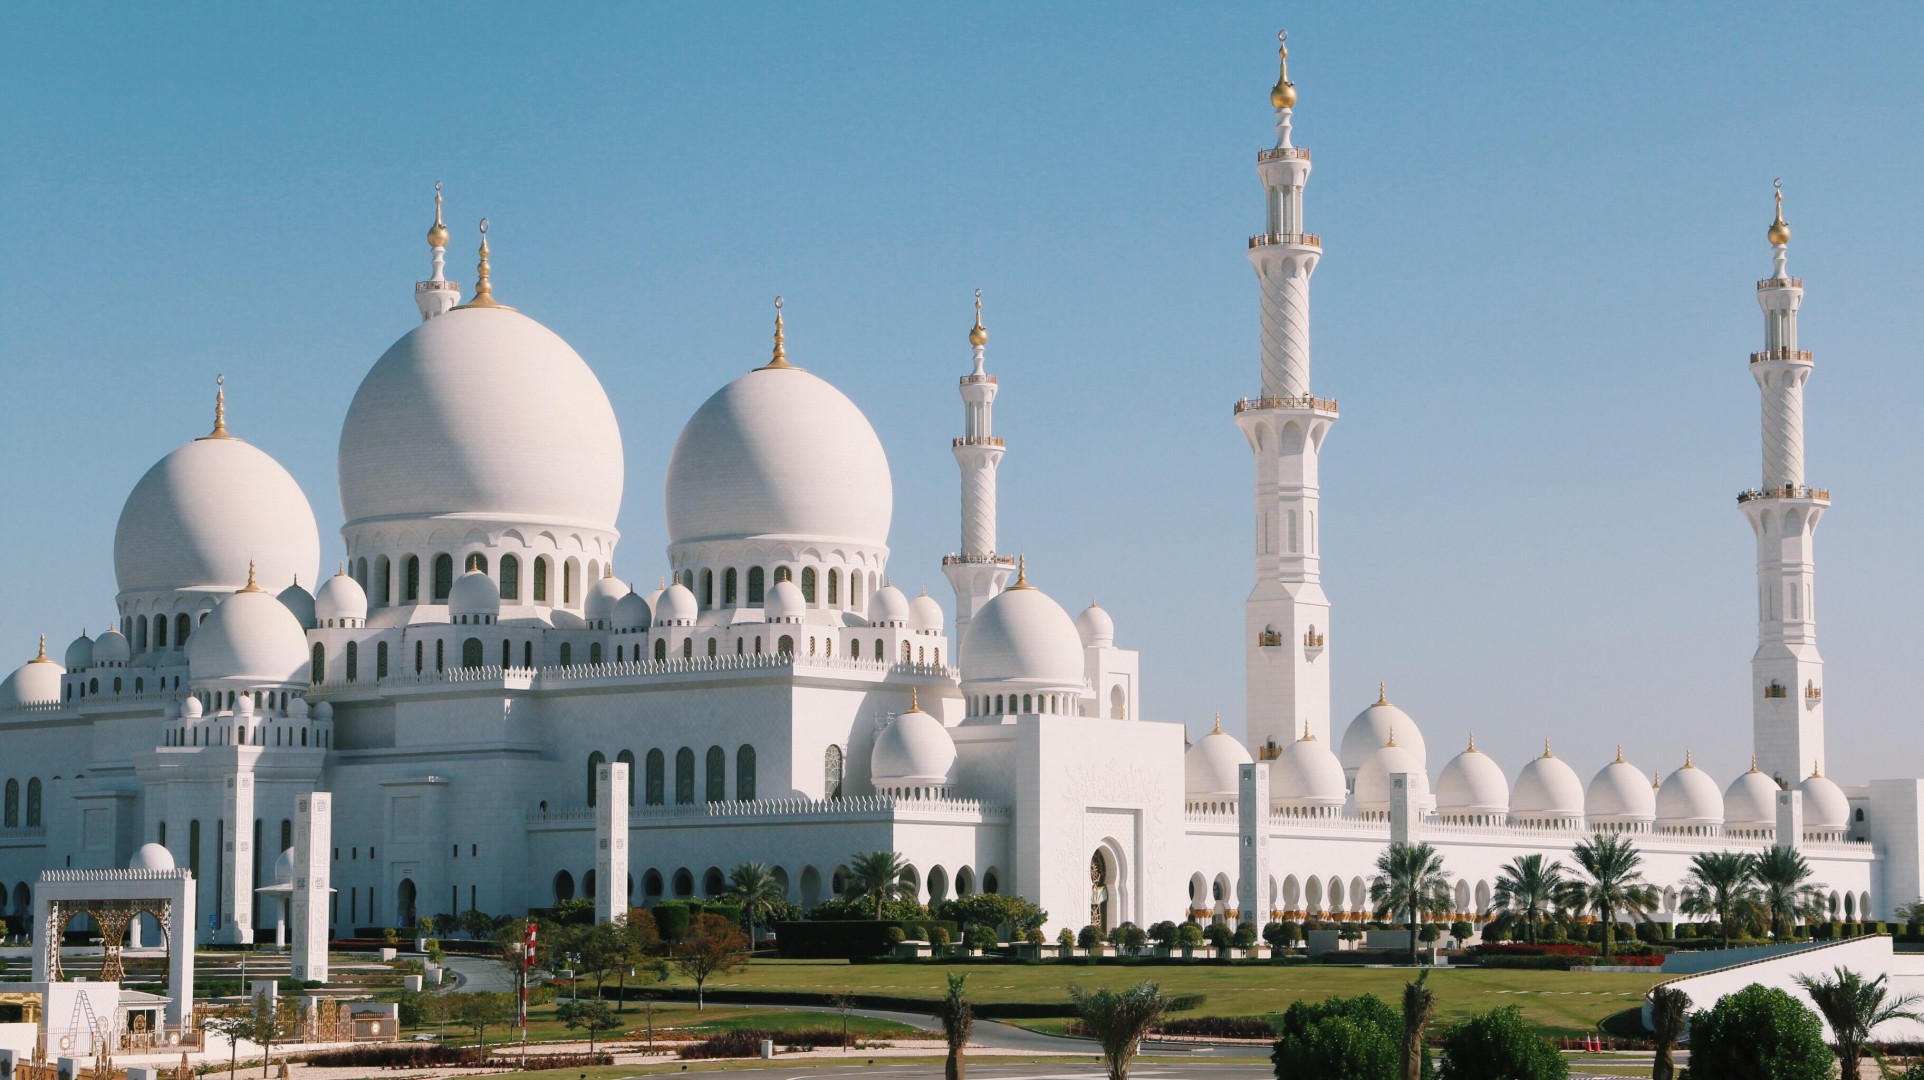 TravelBreak.net - Why Abu Dhabi is the most fascinating city in the world